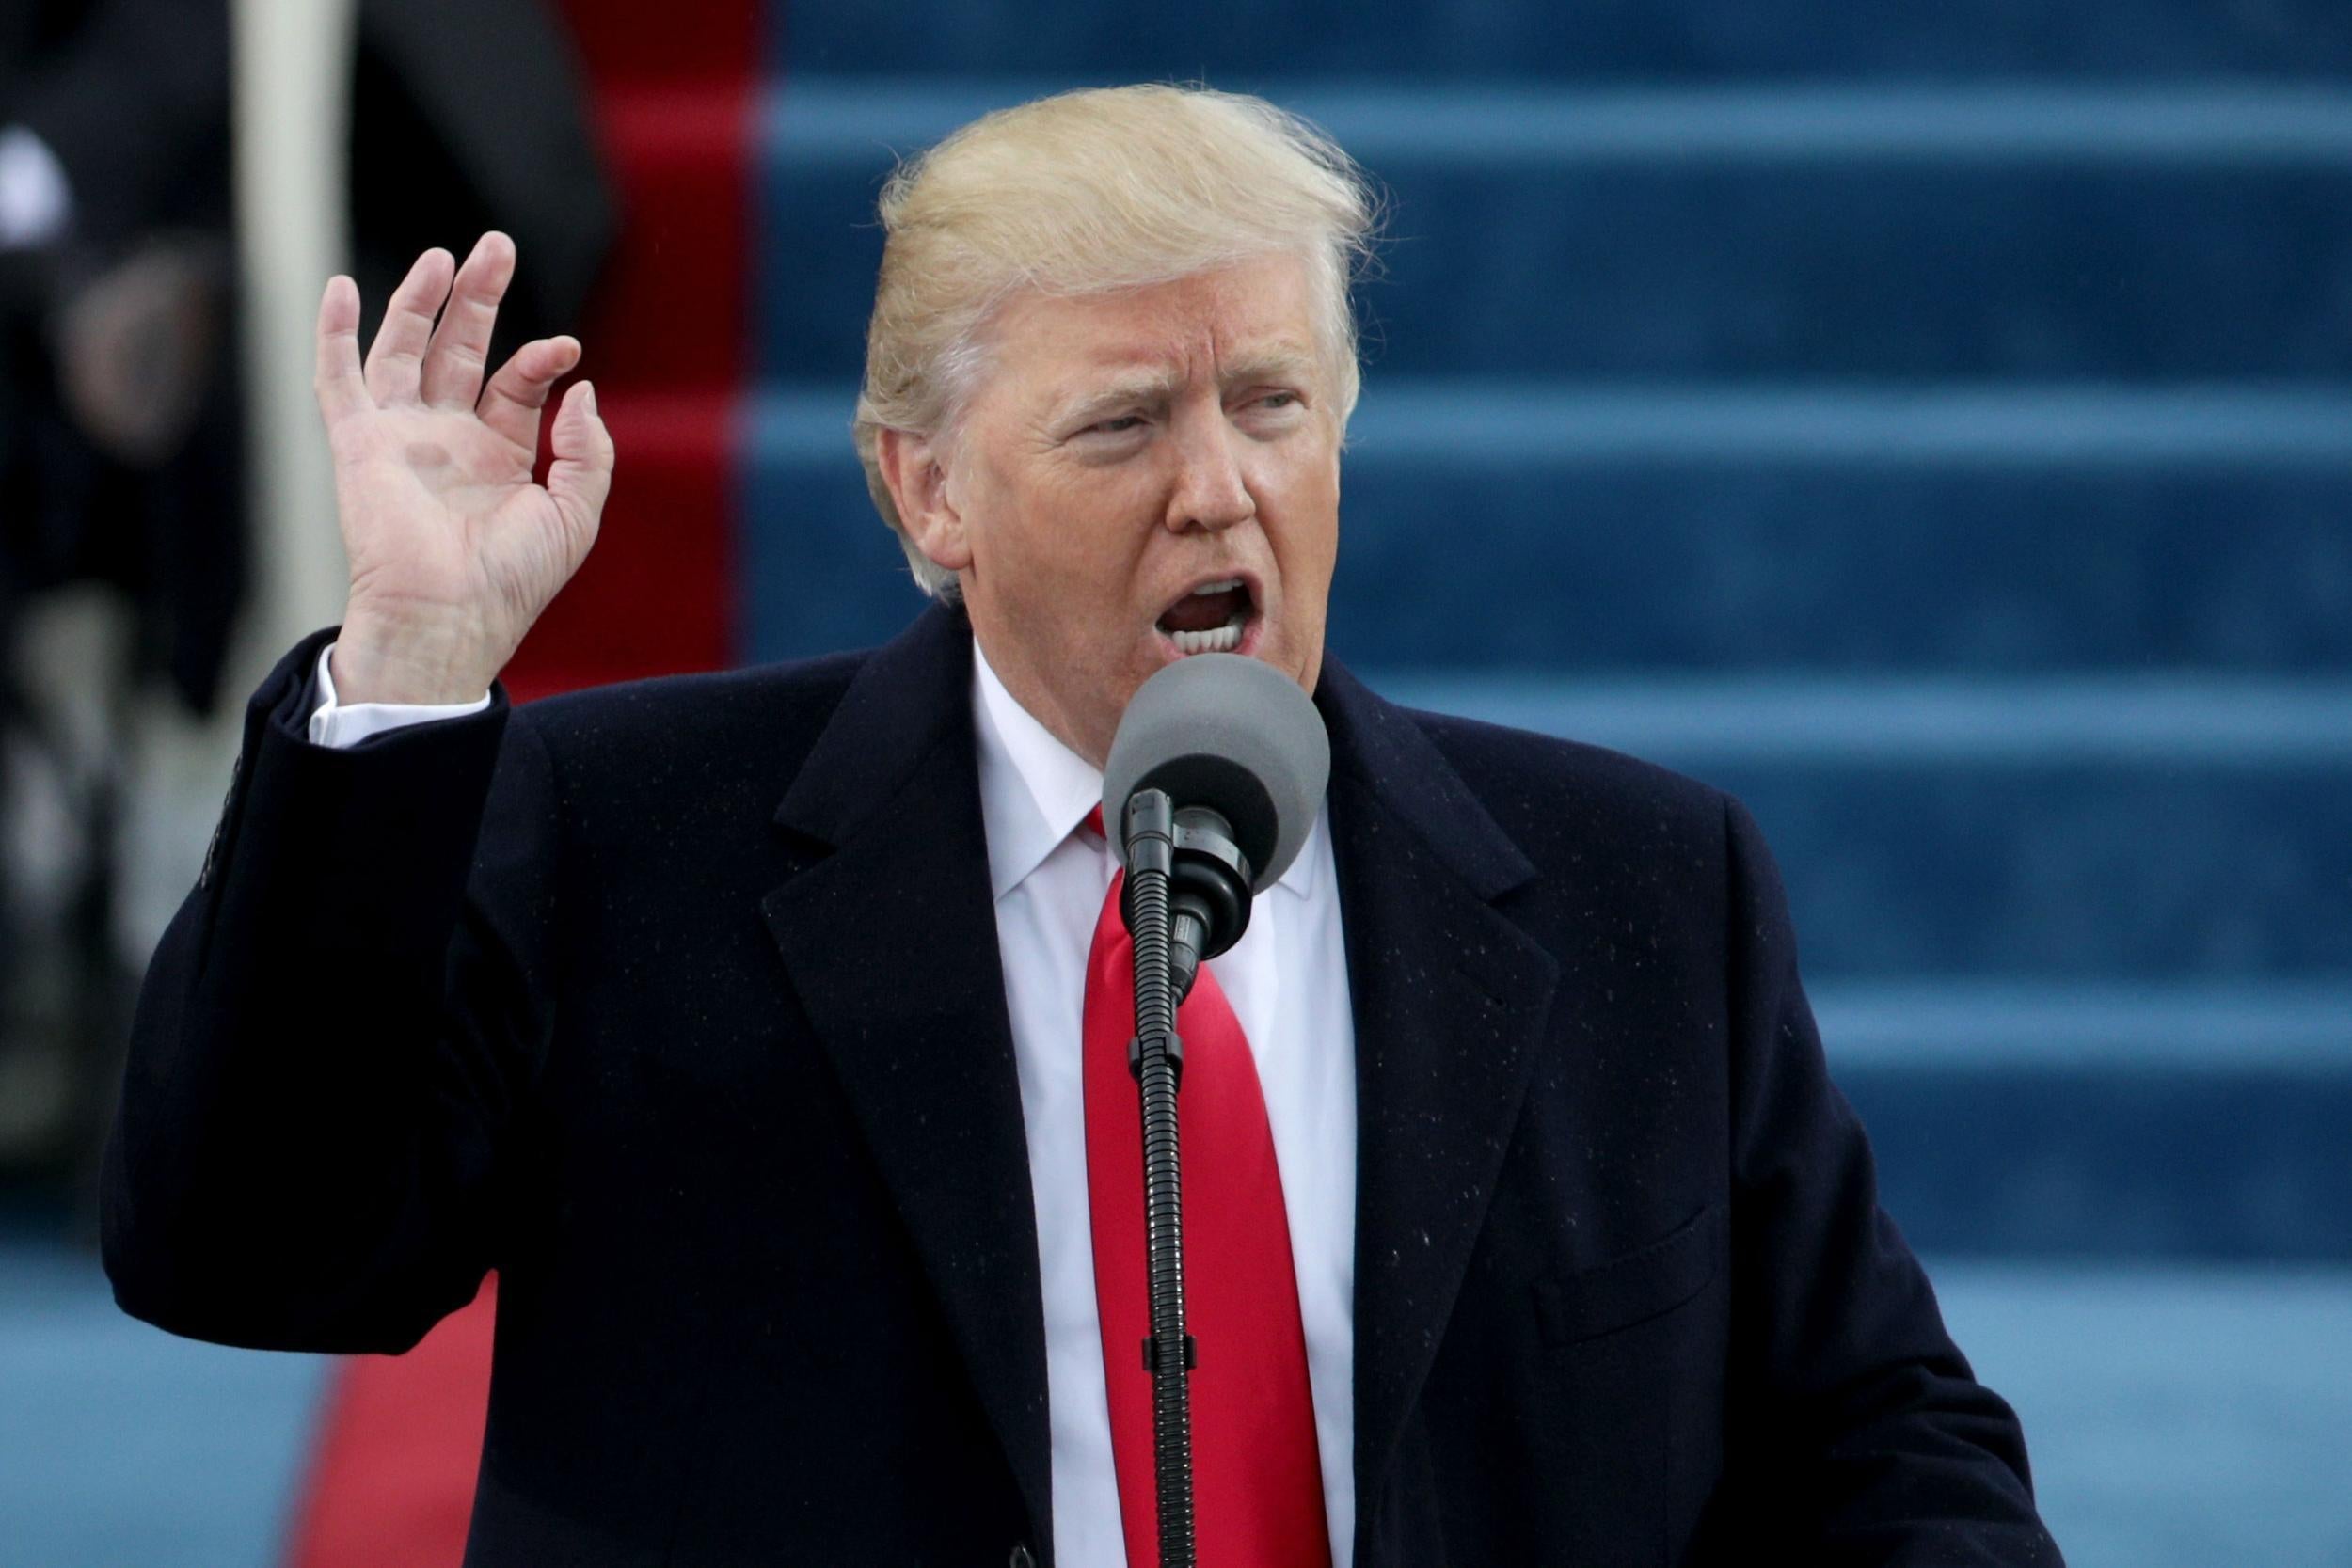 Donald Trump kicks off a year of ups and downs with his inaugural address in January 2017